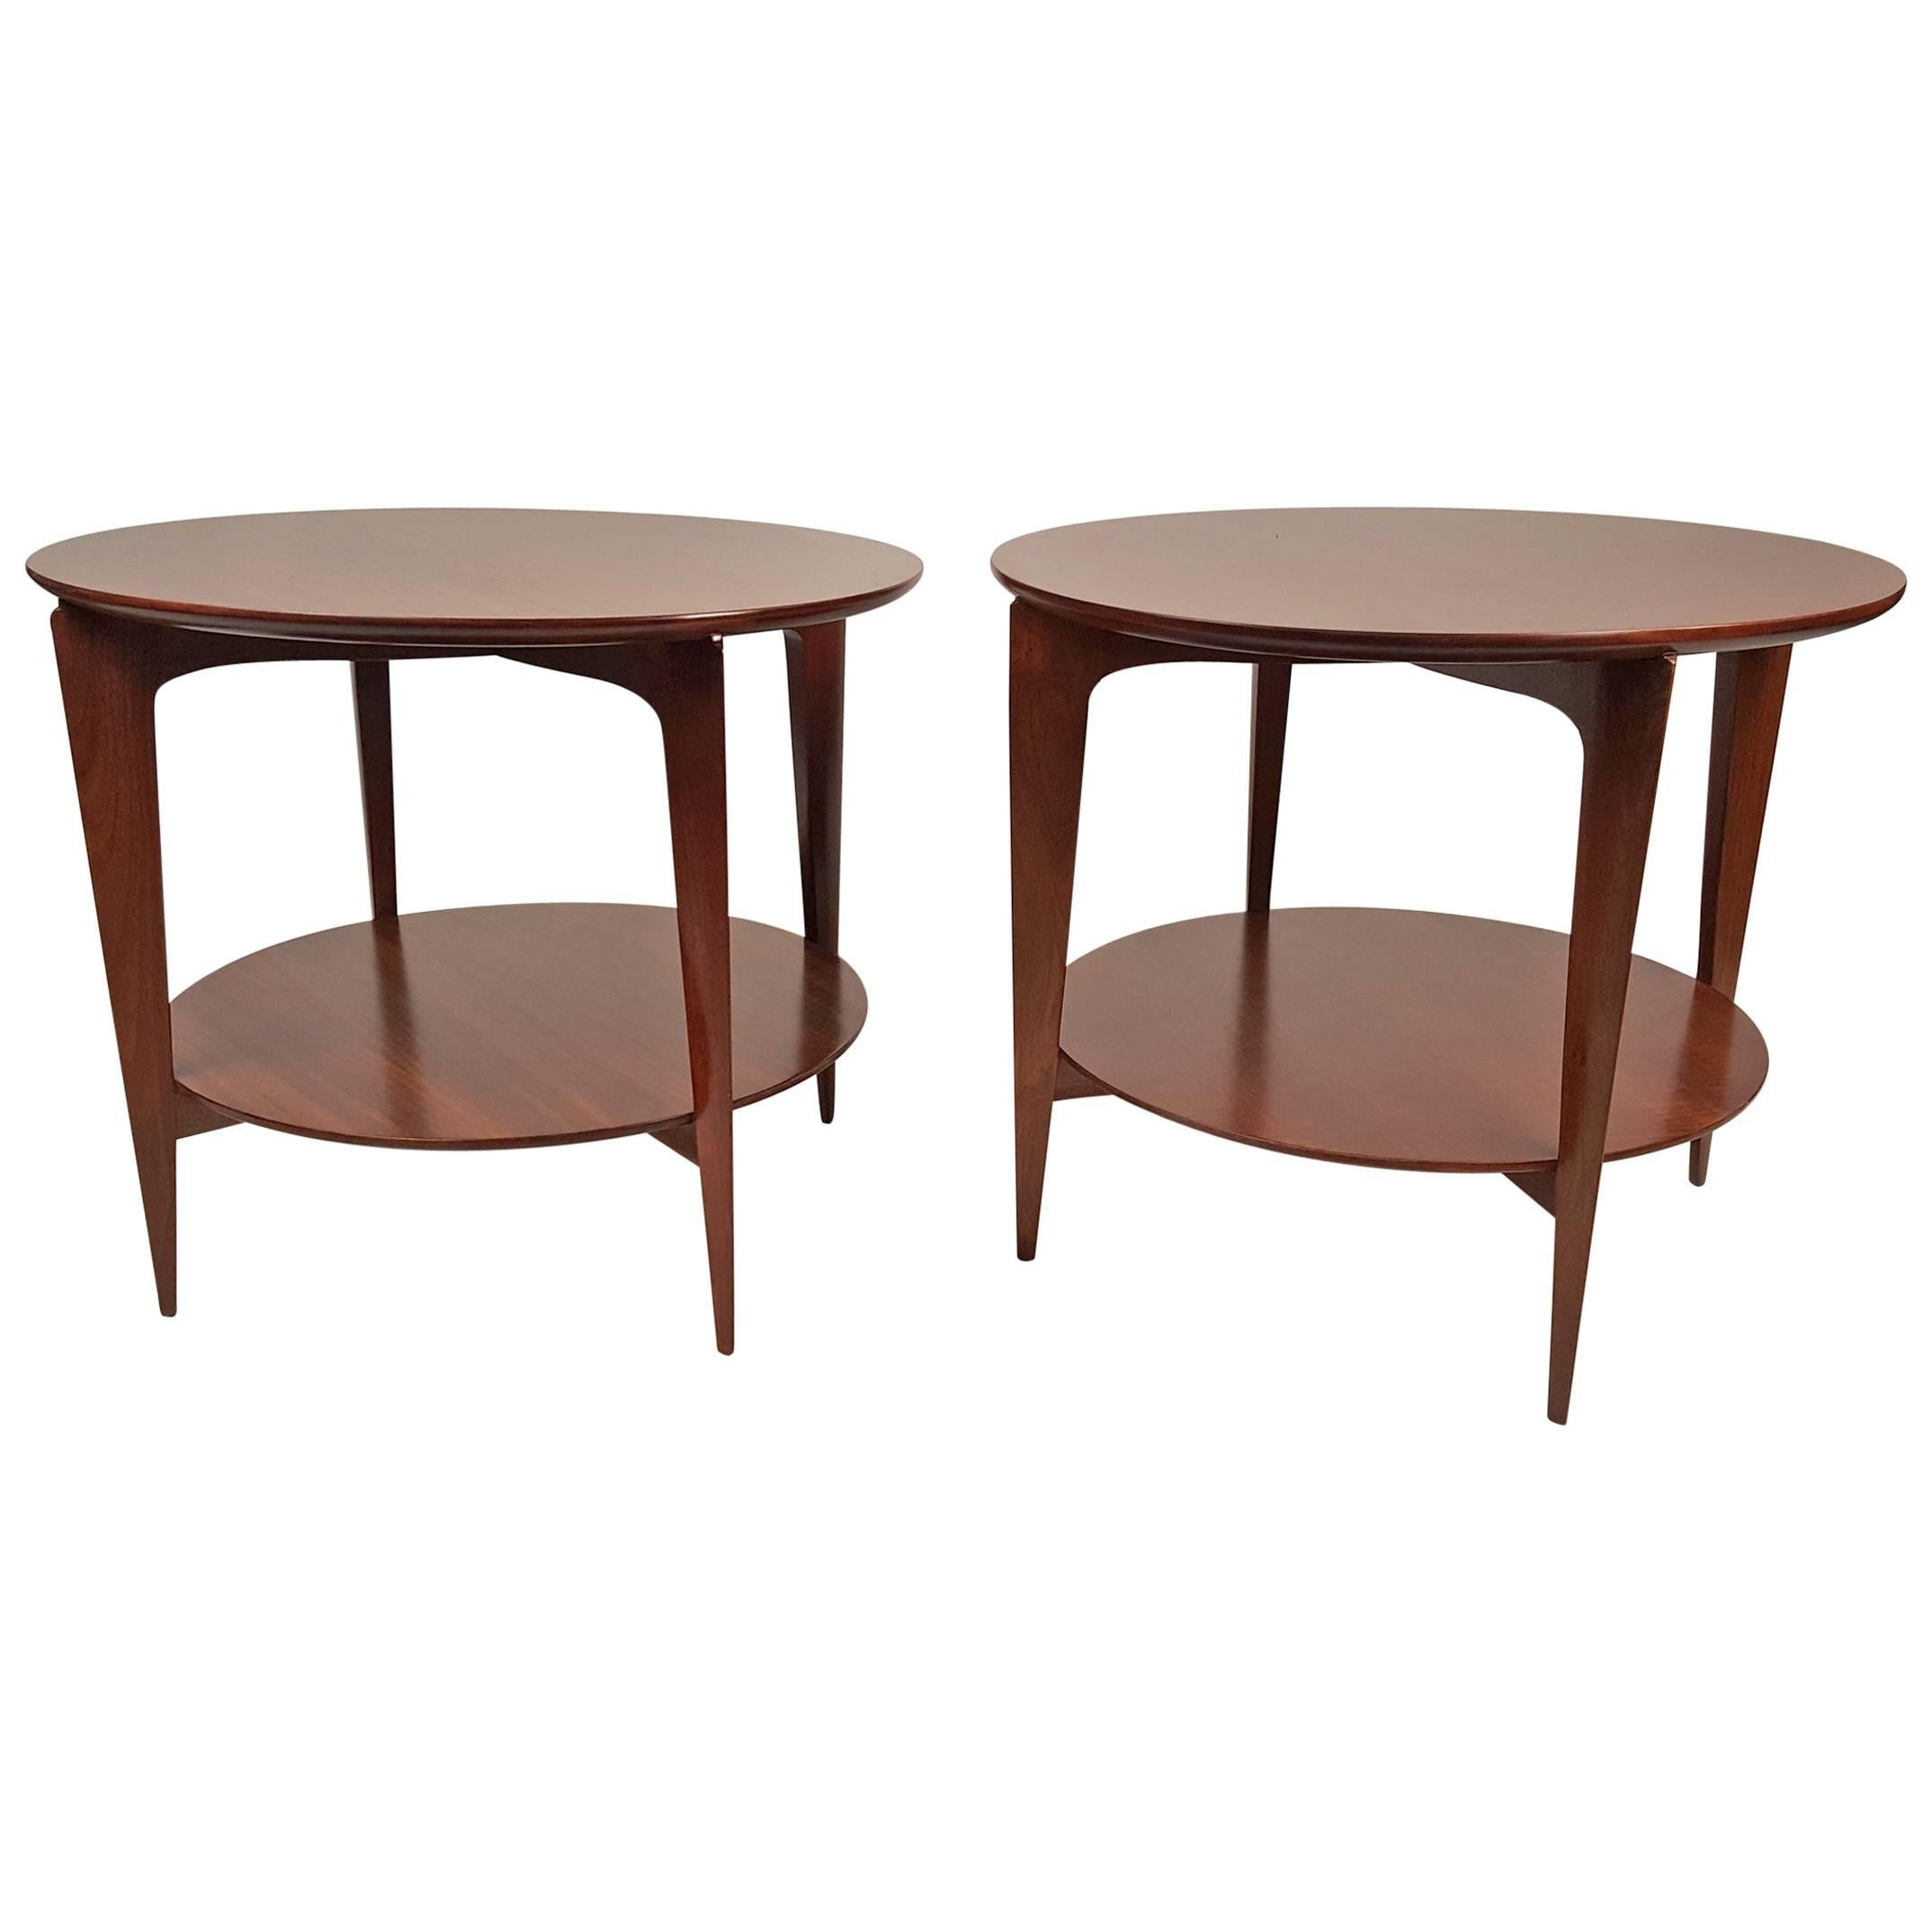 Pair of Gio Ponti Occasional Tables